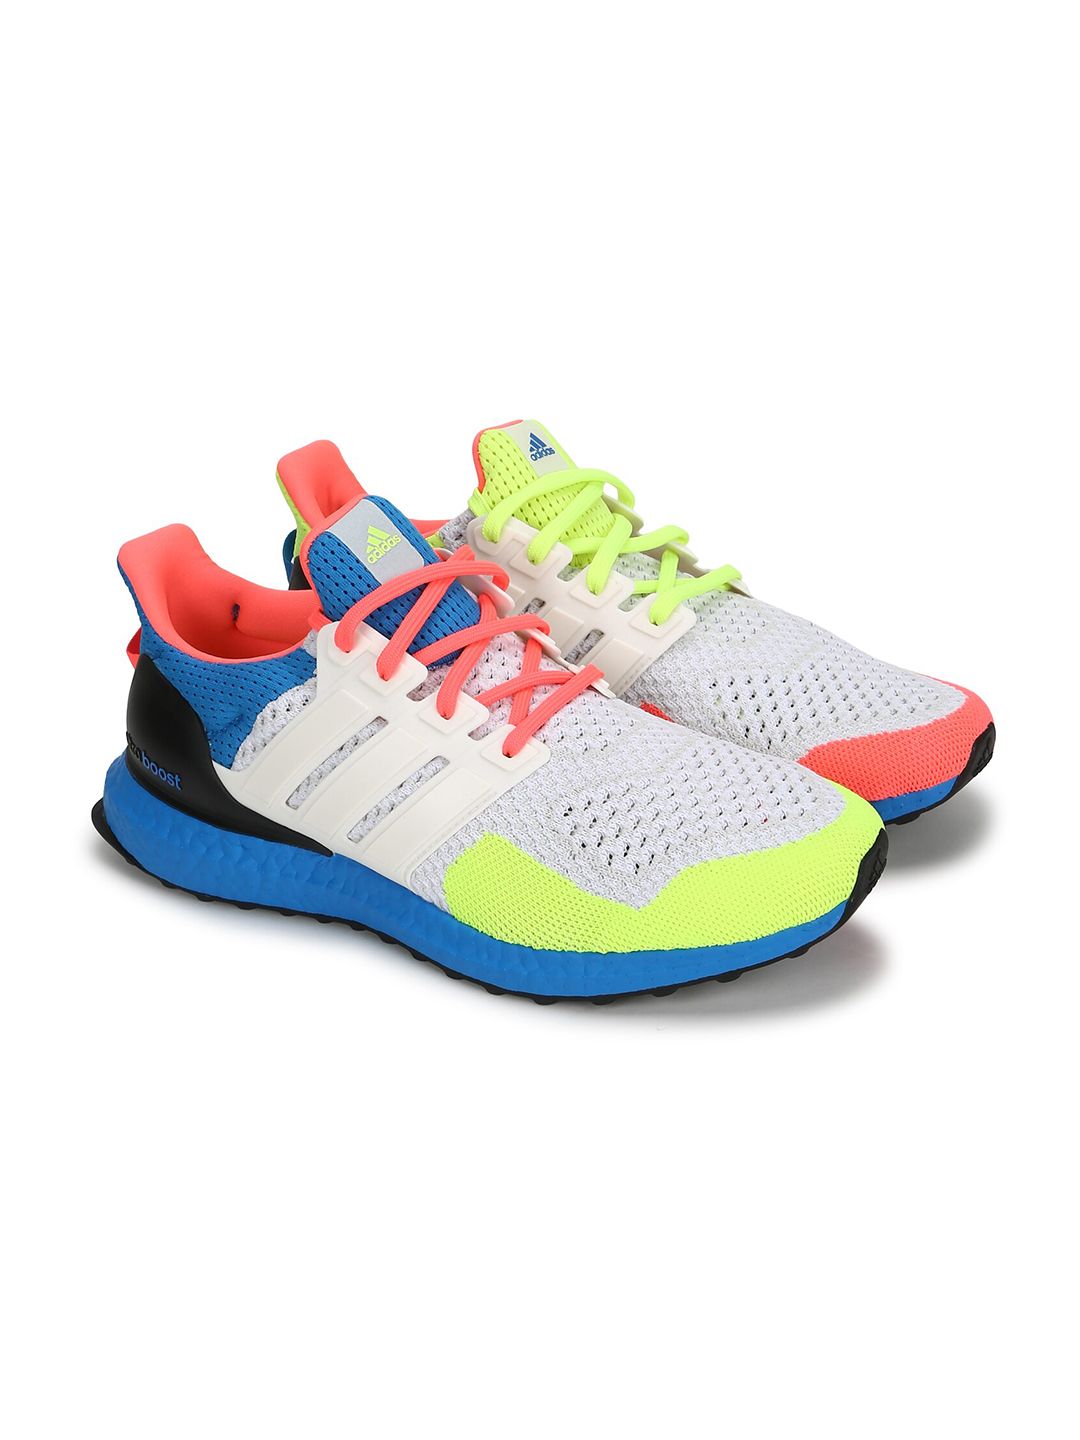 ADIDAS ULTRABOOST 1.0 DNA Unisex White Textile Sustainable Running Shoes Price in India